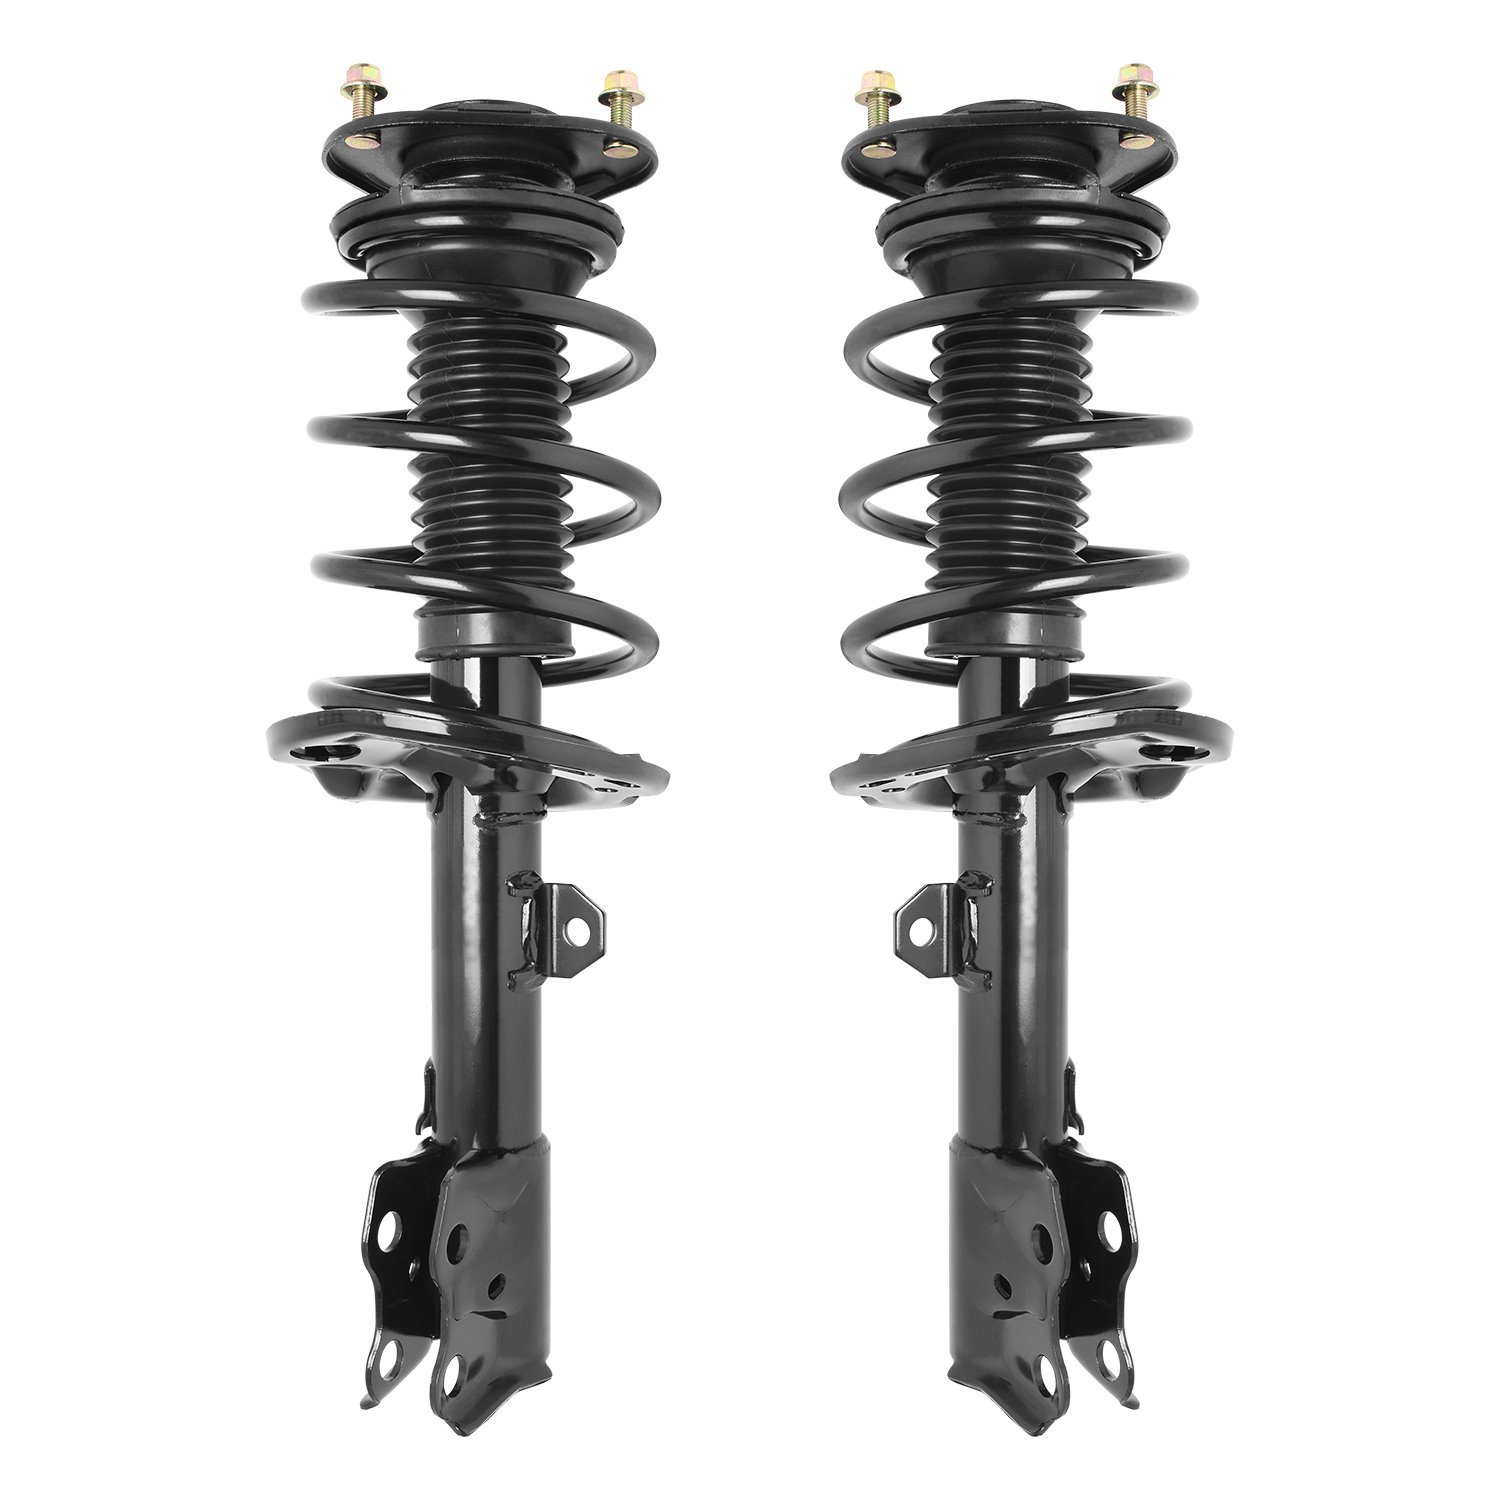 2-11585-11586-001 Suspension Strut & Coil Spring Assembly Set Fits Select Toyota Corolla